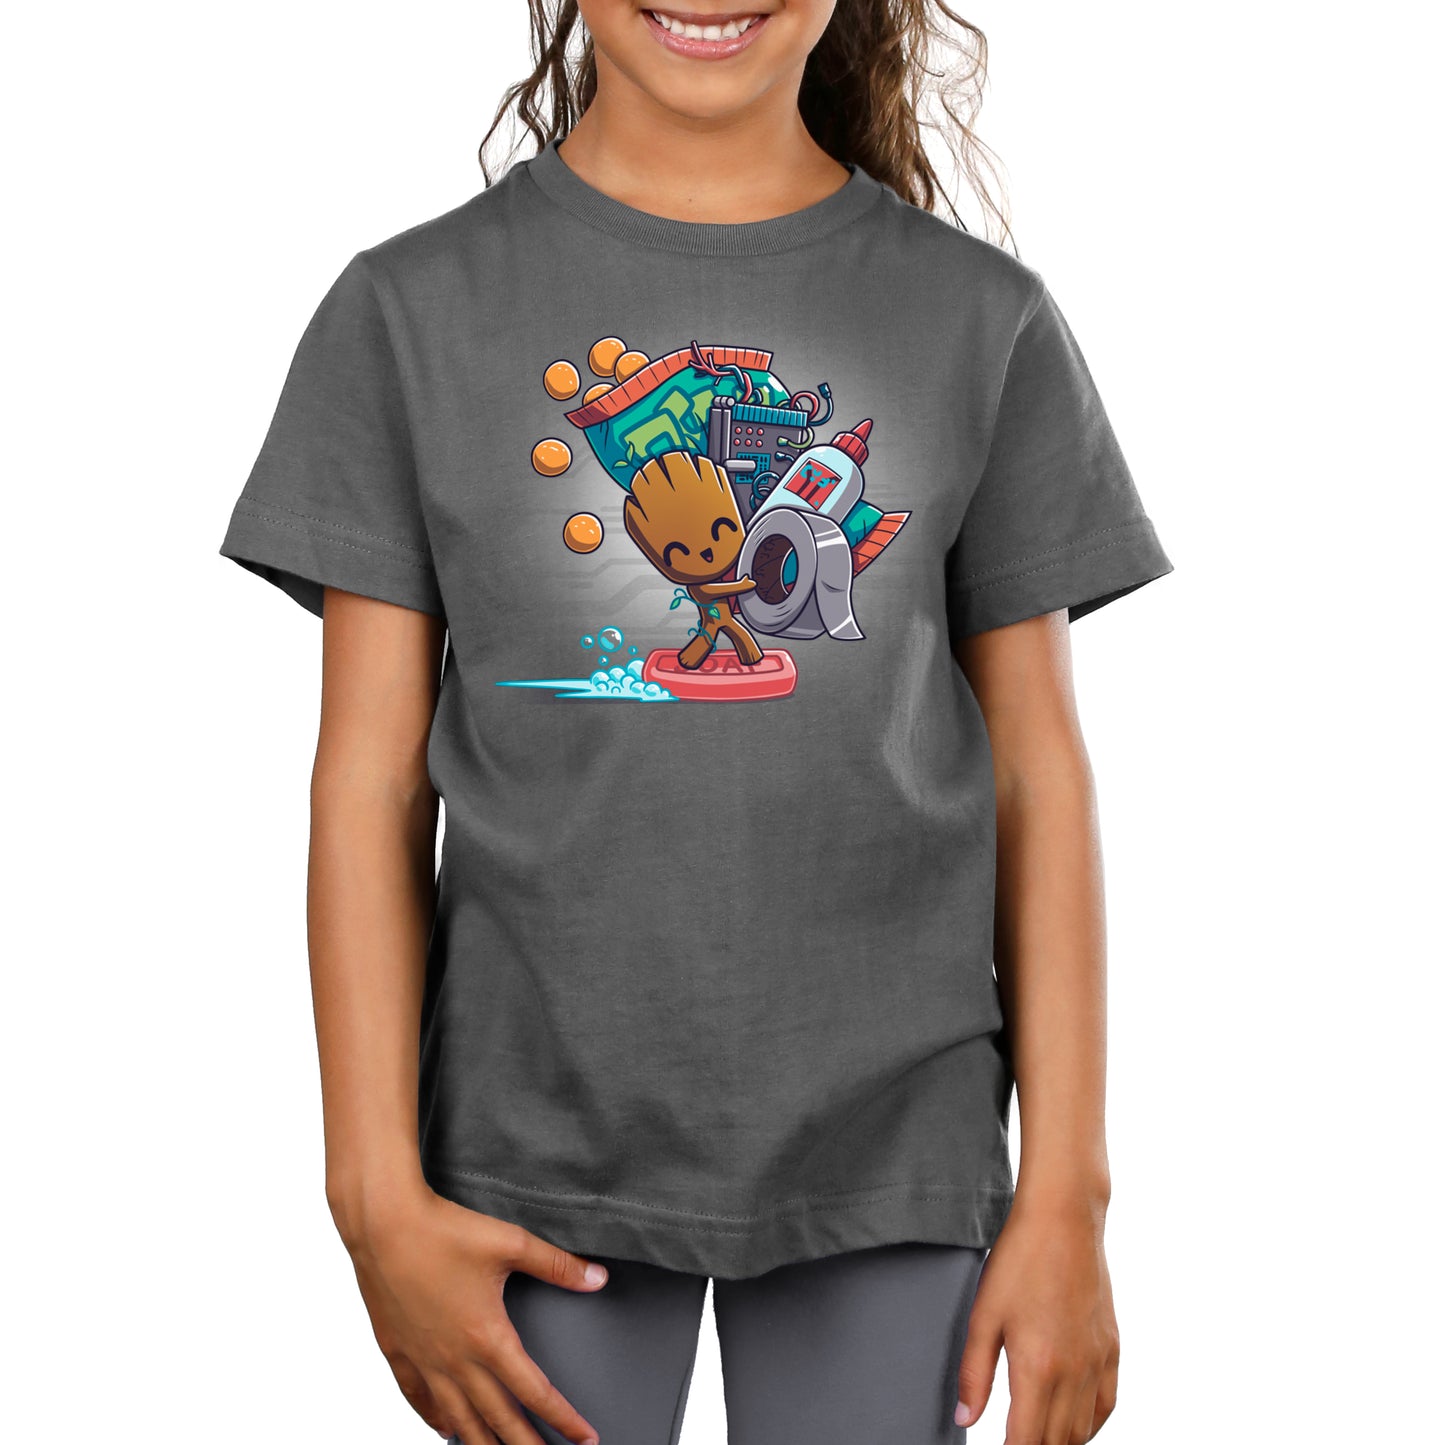 Officially licensed Marvel Guardians of the Galaxy kids t-shirt featuring Crafting Groot.